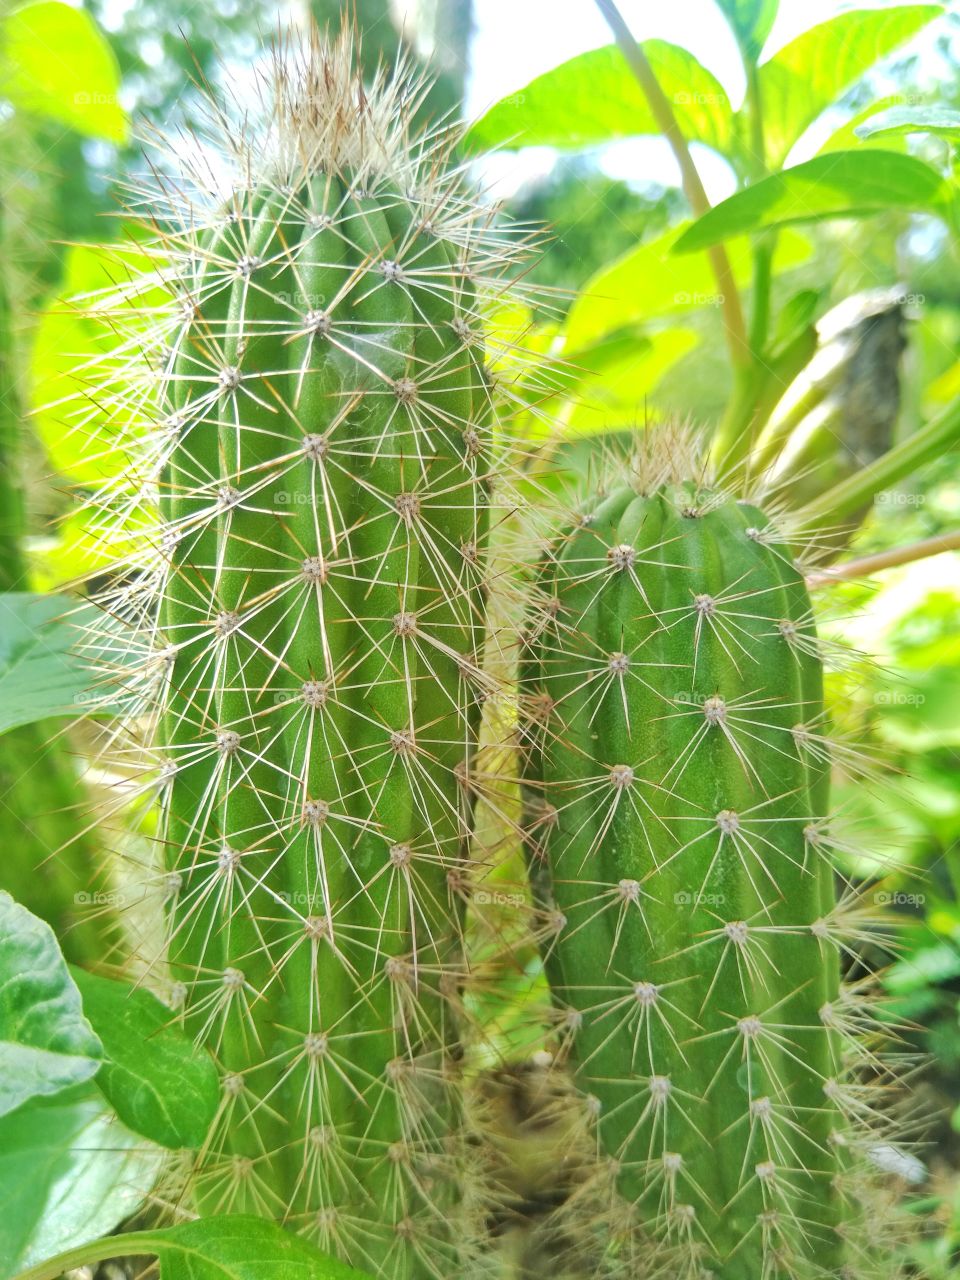 Cactus plant in the home garden